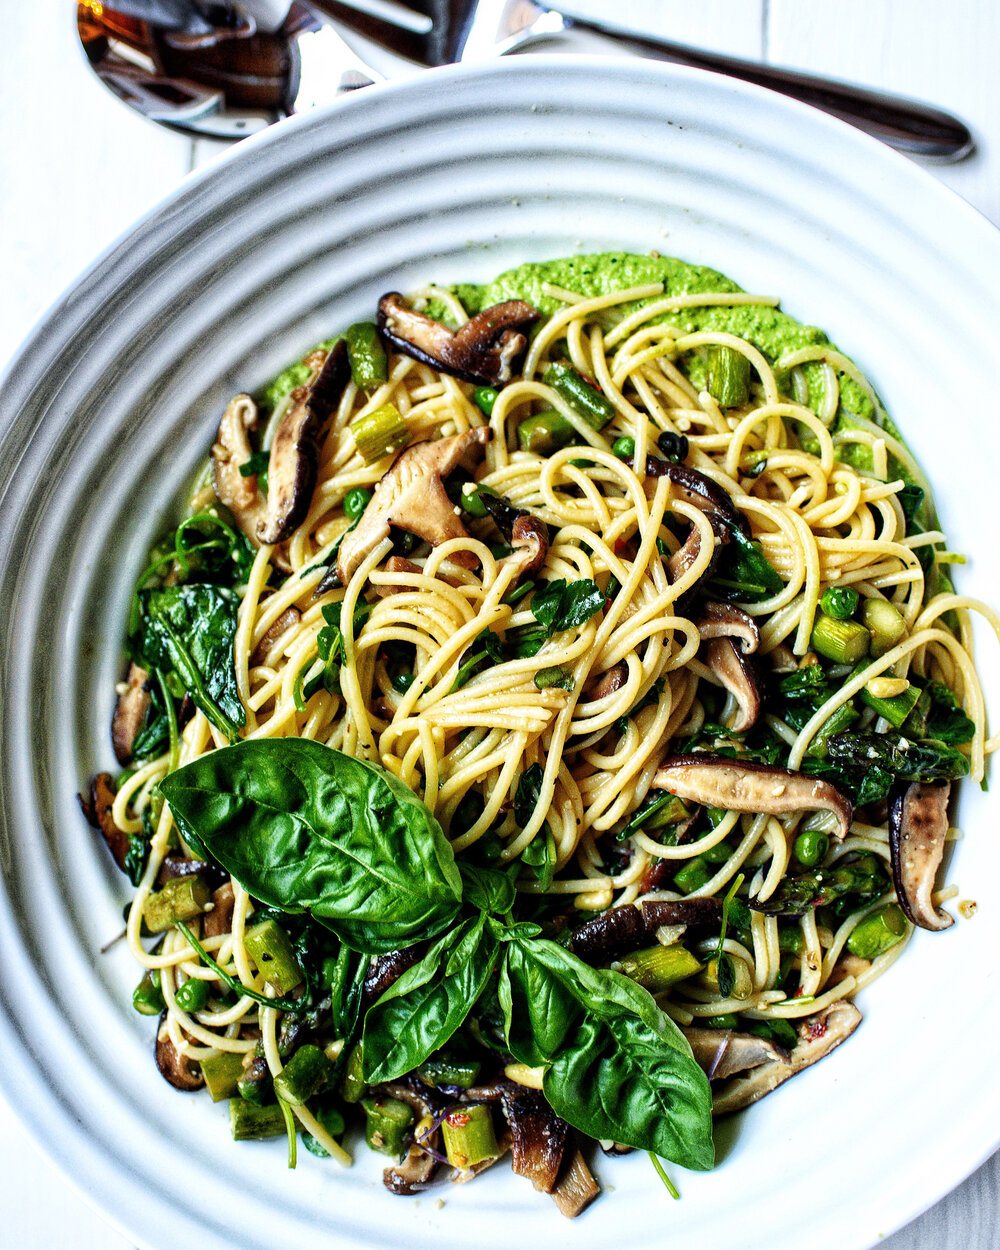 plate with spaghetti pasta, basil pea pesto sauce and large basil leaves as topping to decorate by teri-ann carty